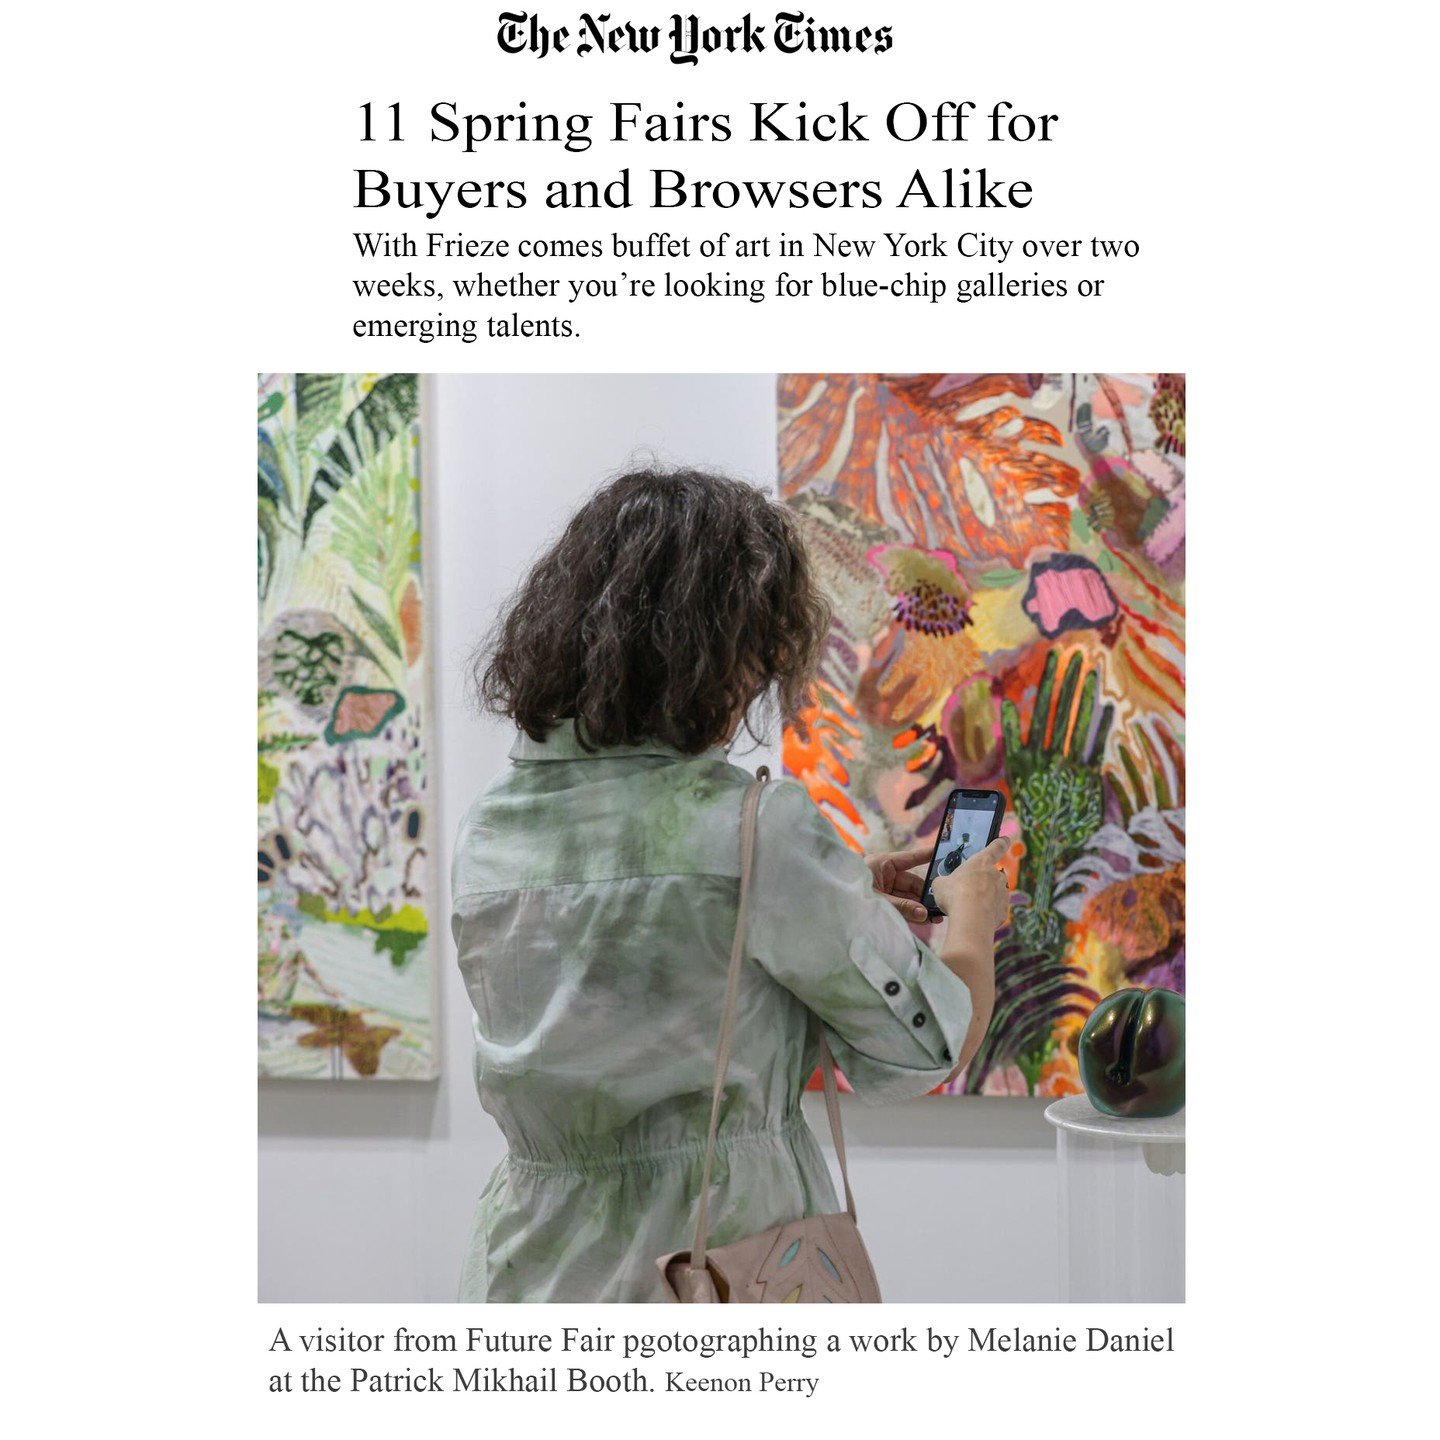 Thank you NY Times for the shout out! I was in Copenhagen for a solo show with Christoffer Egelelund Gallery when I received the news and was completely blown away. Gratitude. ❤️

#@patrick_mikhail_gallery #@futurefairs #@nytimes #artfair #NYC #@asya